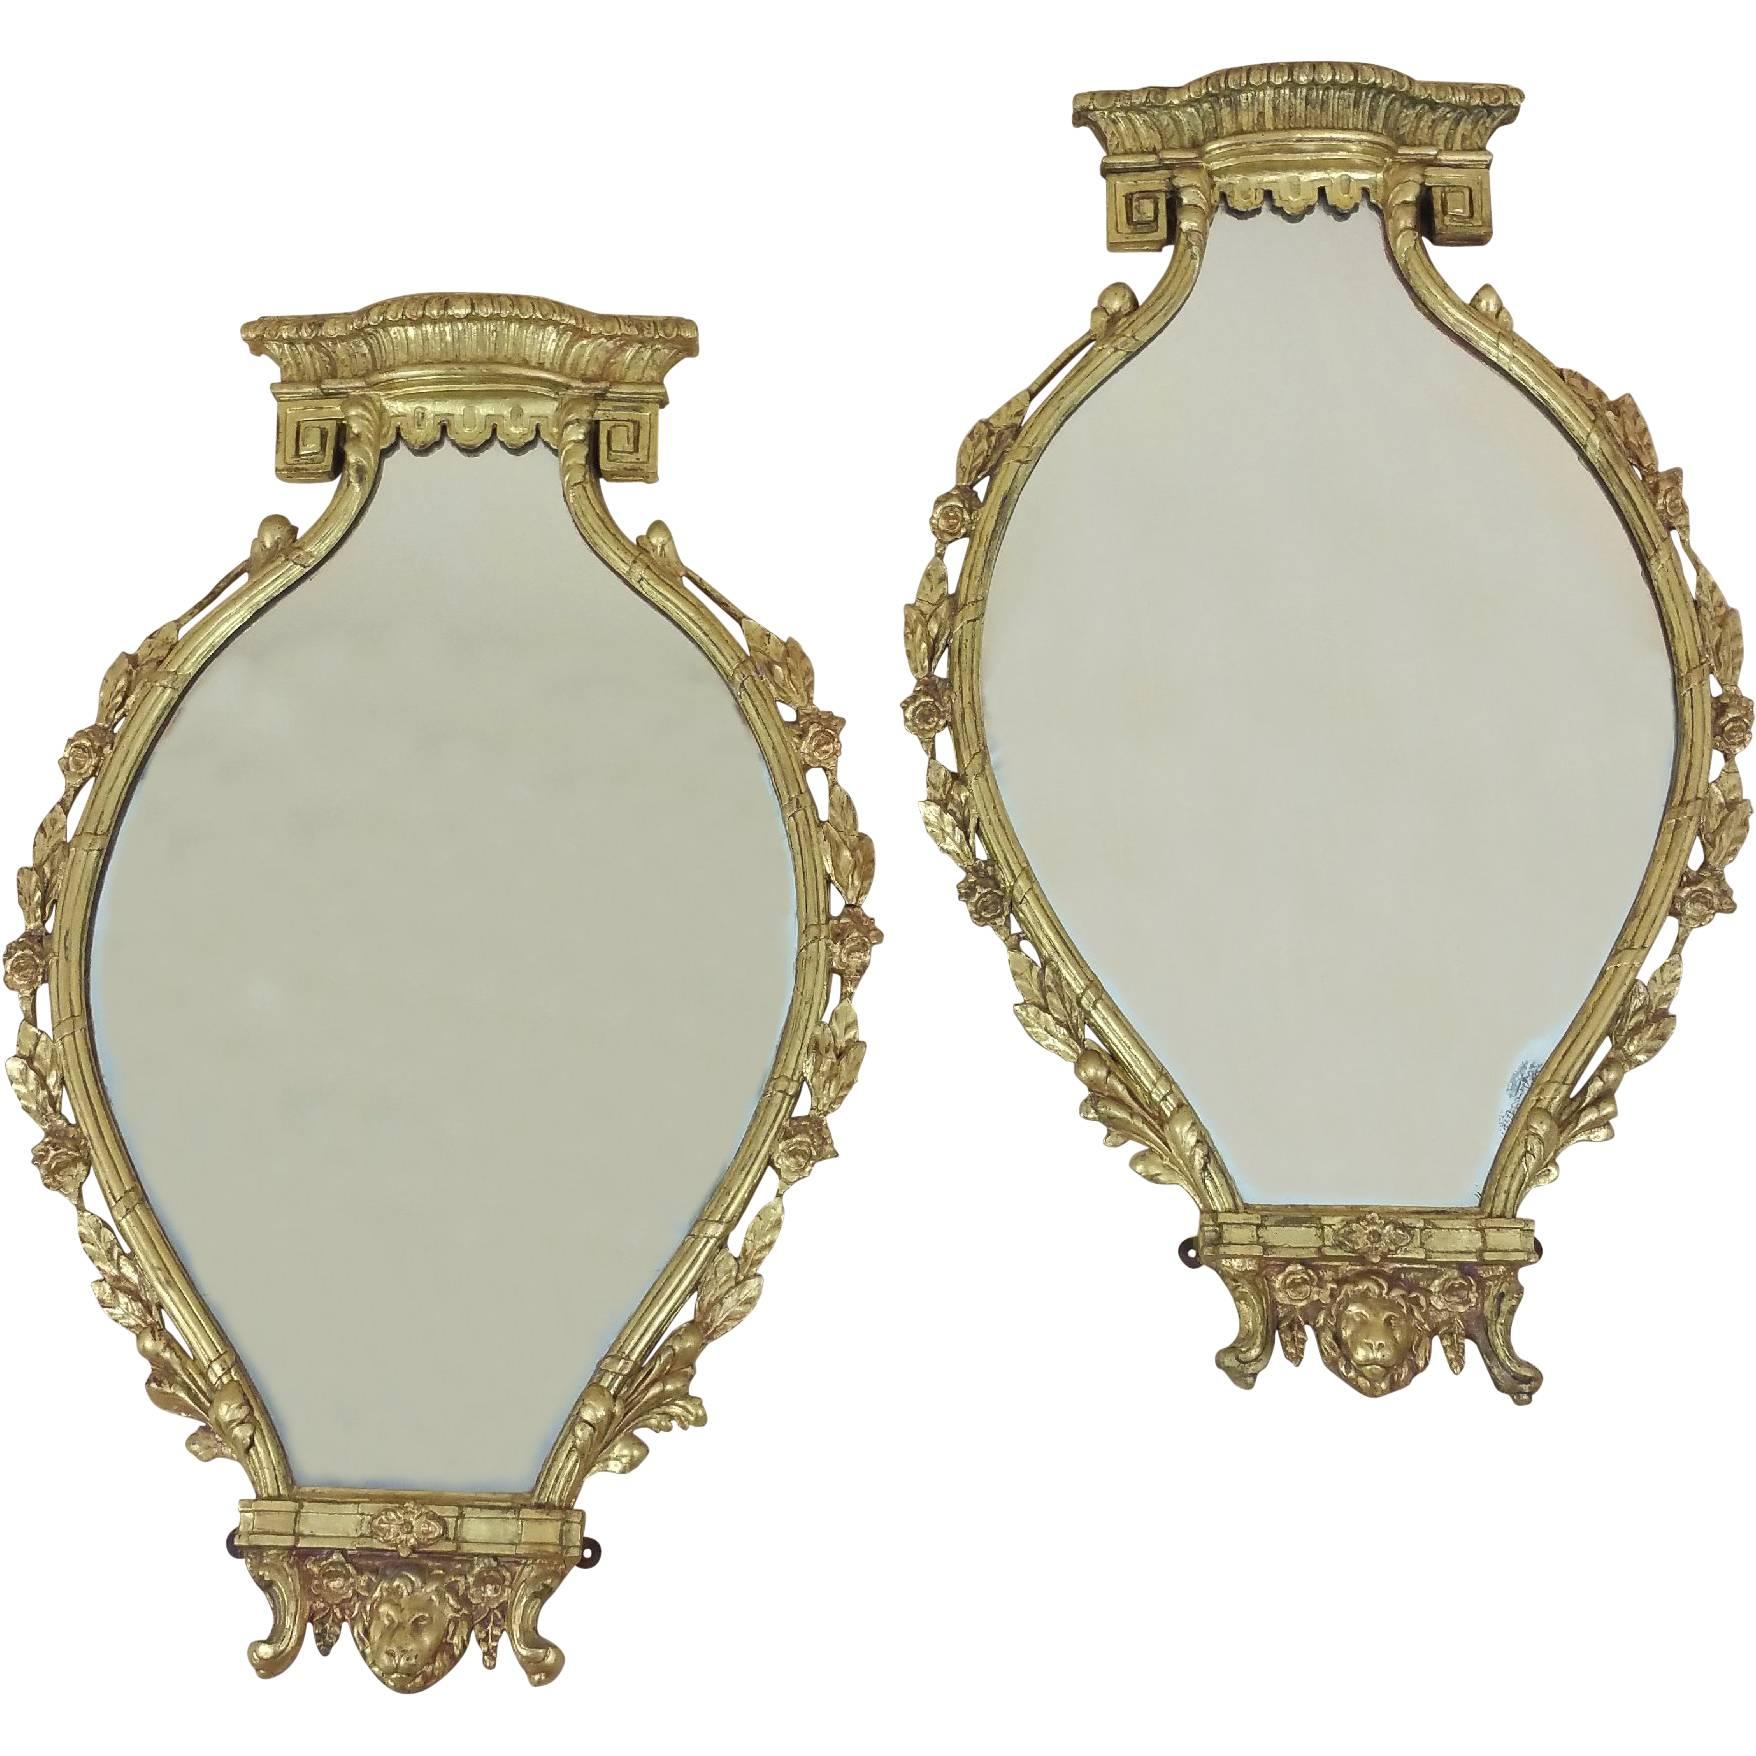 Pair of Mid-19th Century Neoclassical Gilt Shaped Wall Mirrors